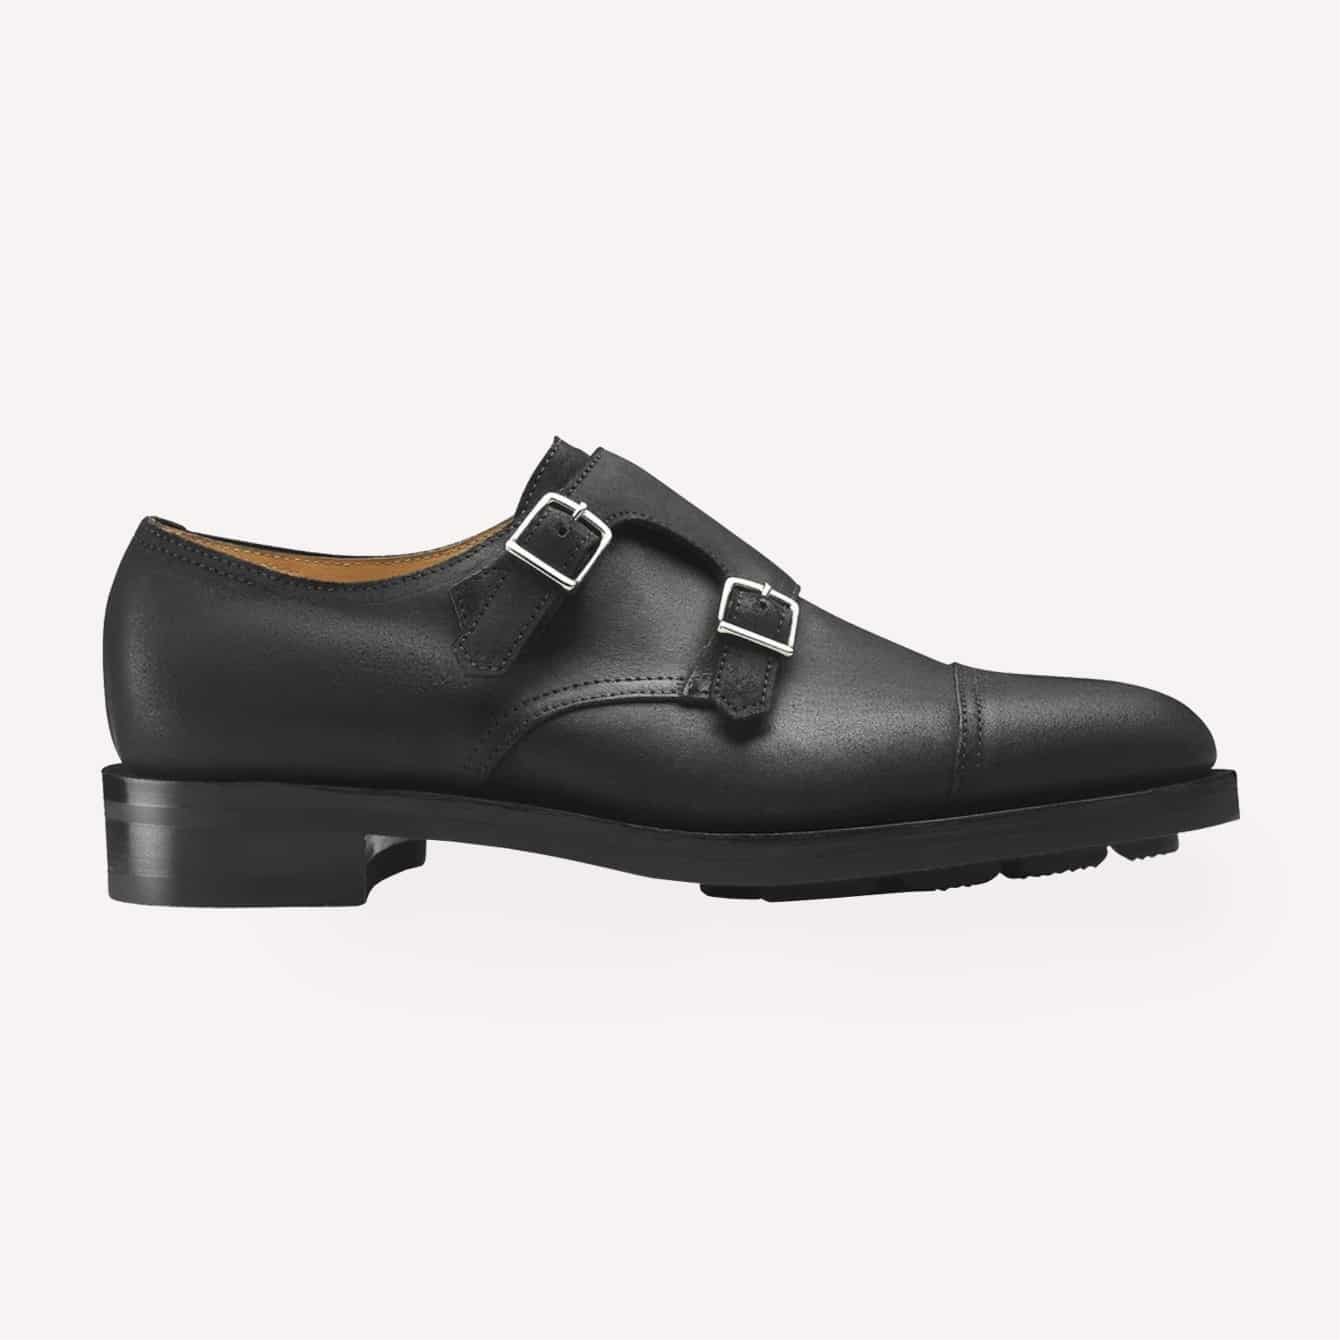 Best Semi-formal Shoes For Men to Ace a Smart Look - Sheen Magazine